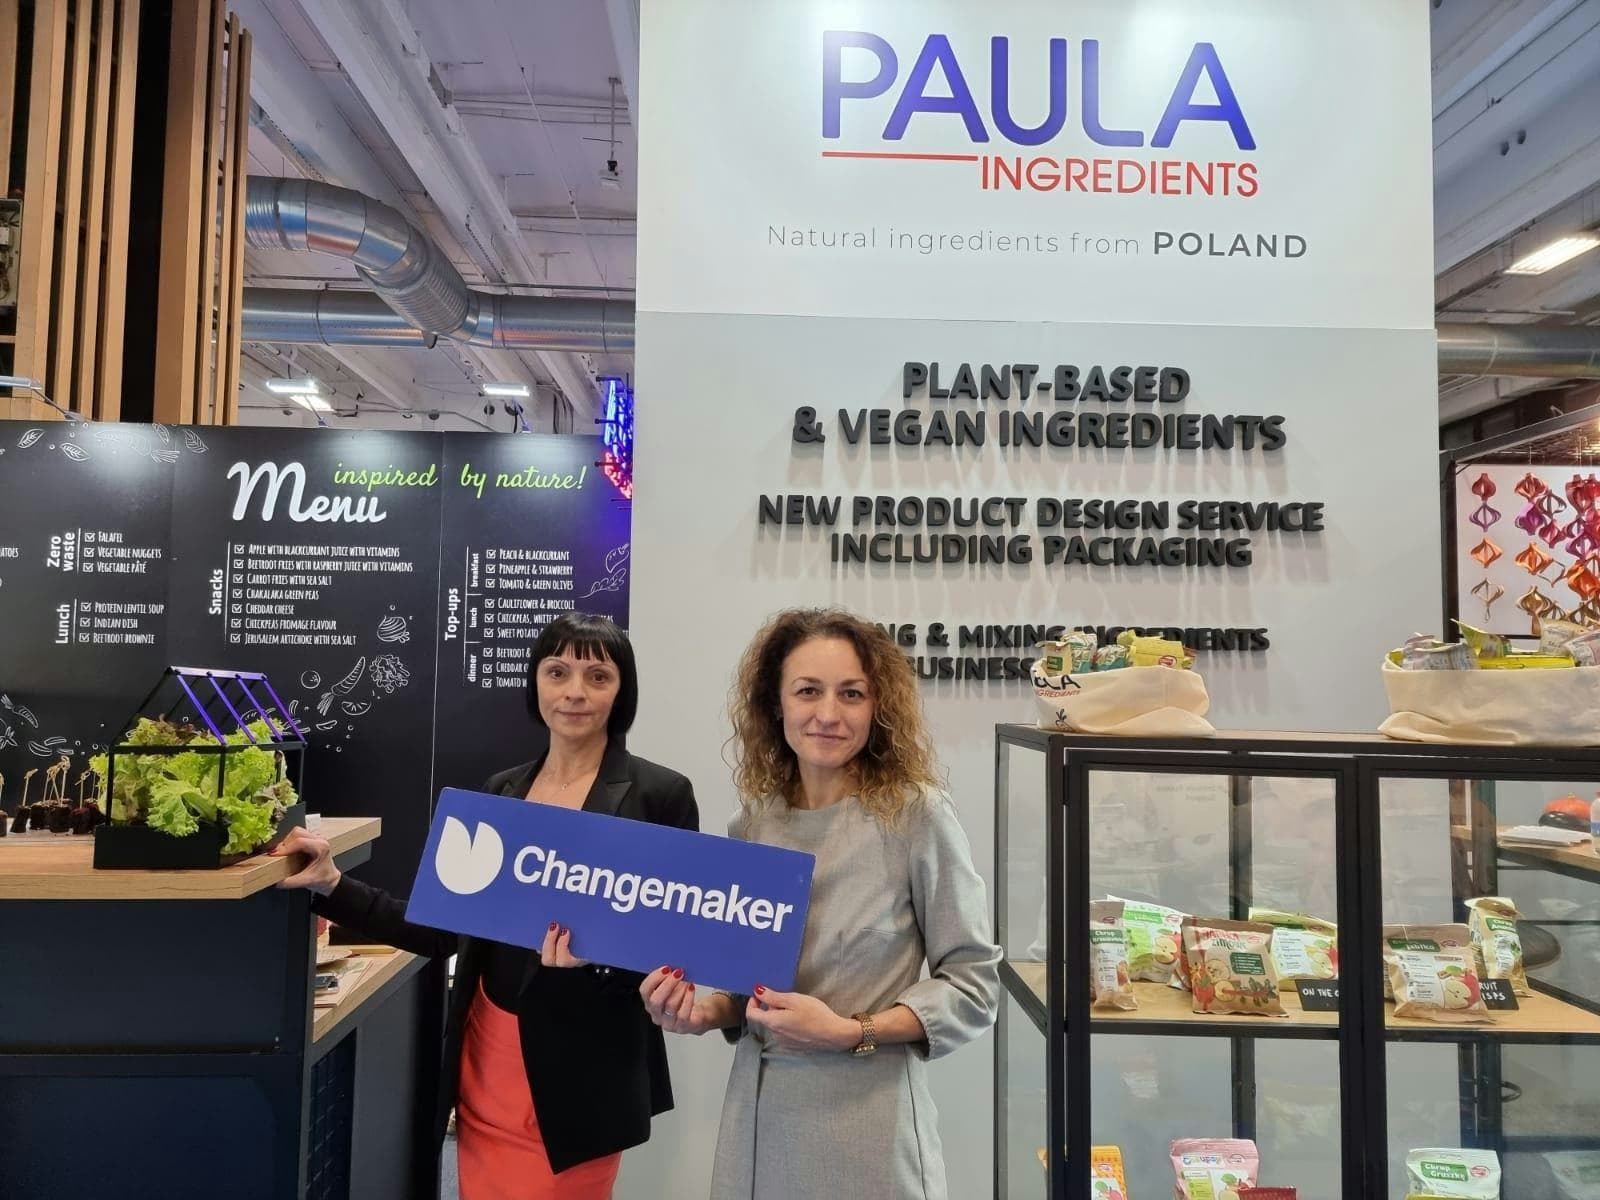 #Changemaker: Trust nature. Paula ingredients, the company that produces dried fruits only from seasonal products